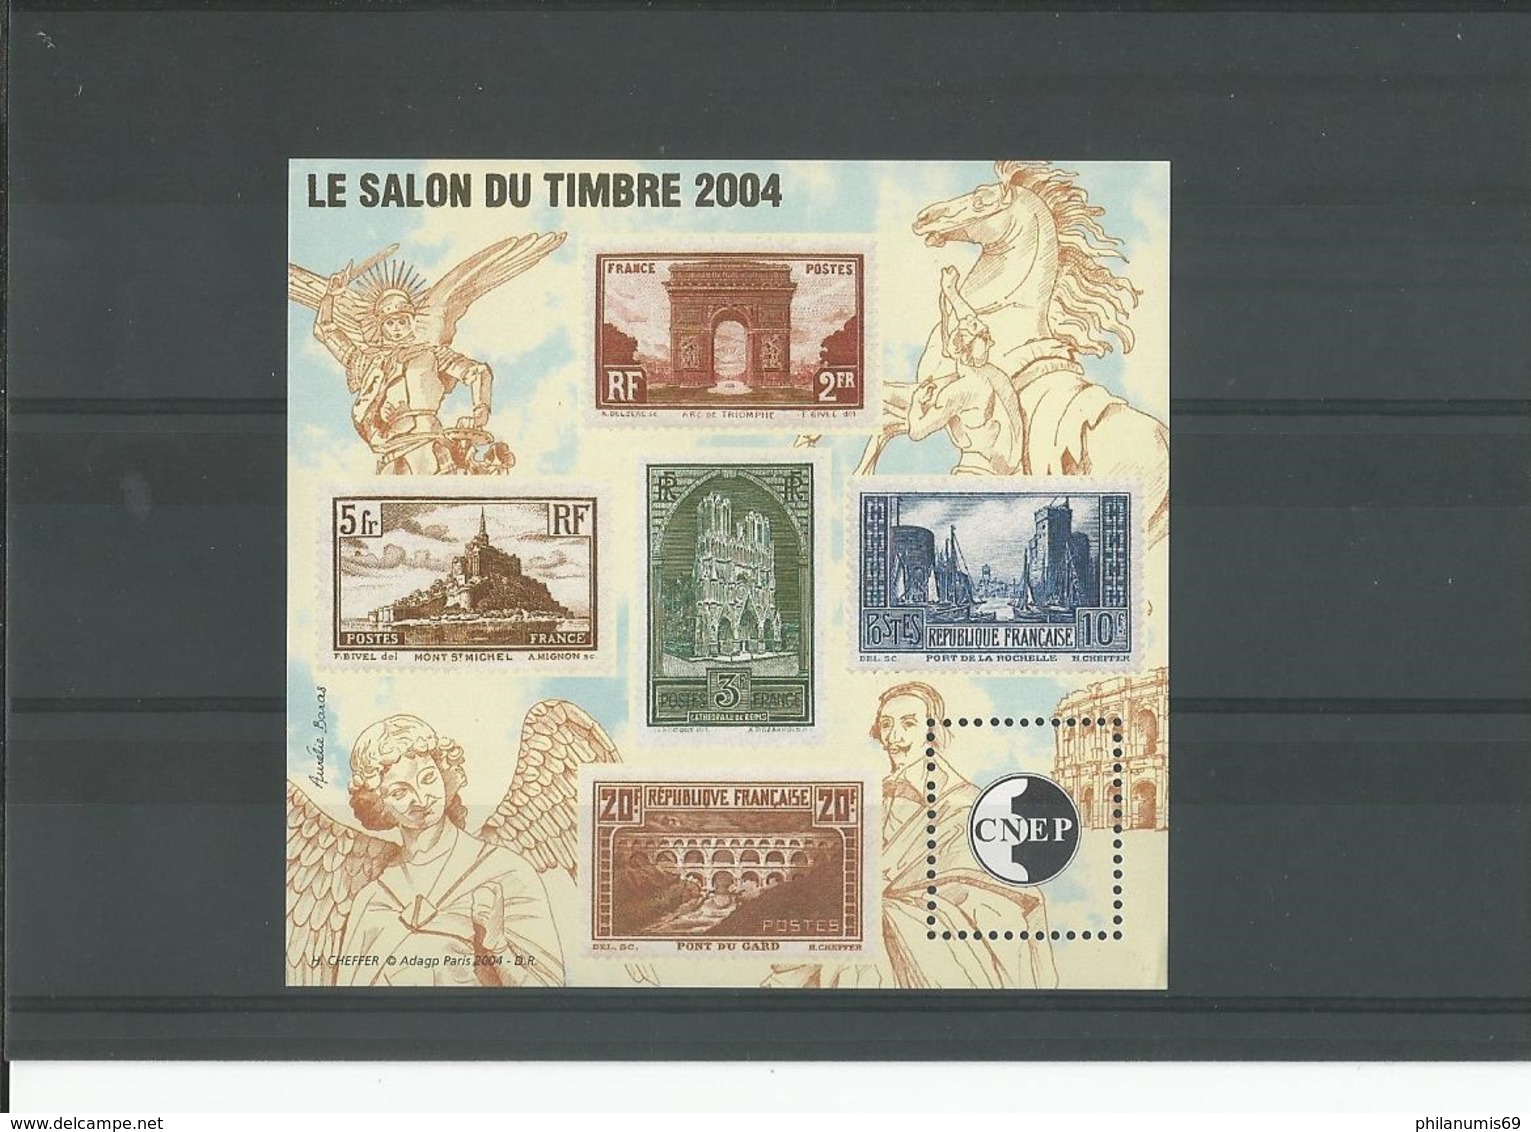 FRANCE 2004 - YT 41 - NEUF SANS CHARNIERE ** (MNH) GOMME D'ORIGINE LUXE - CNEP